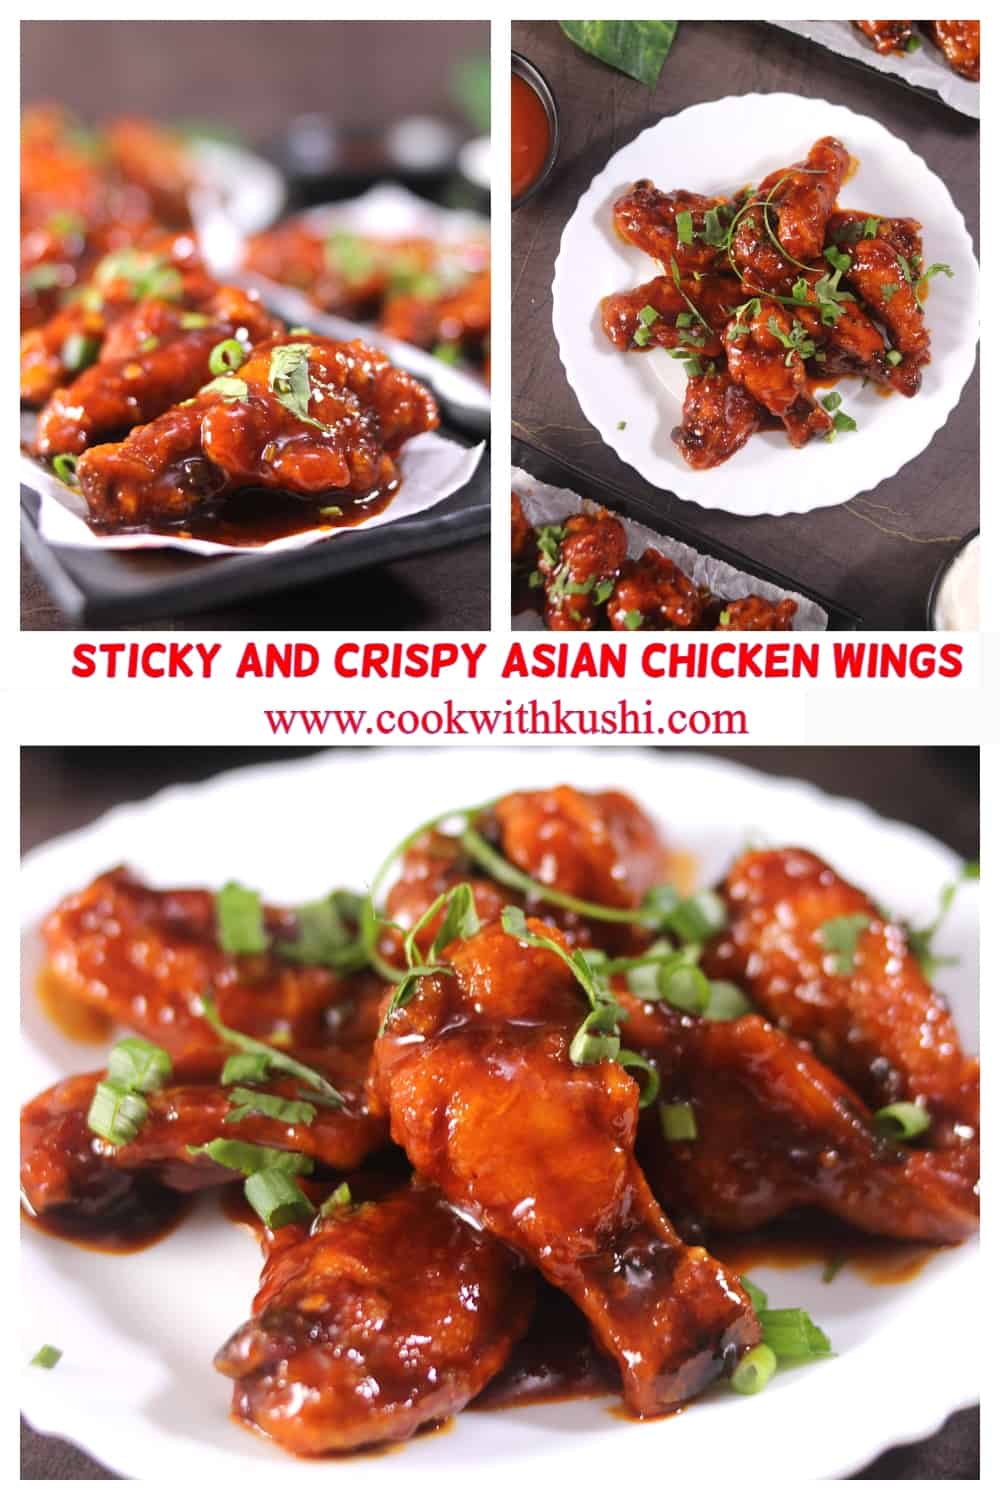 3 different images of chicken wings - spicy and crispy, sweet and sticky wings for parties 